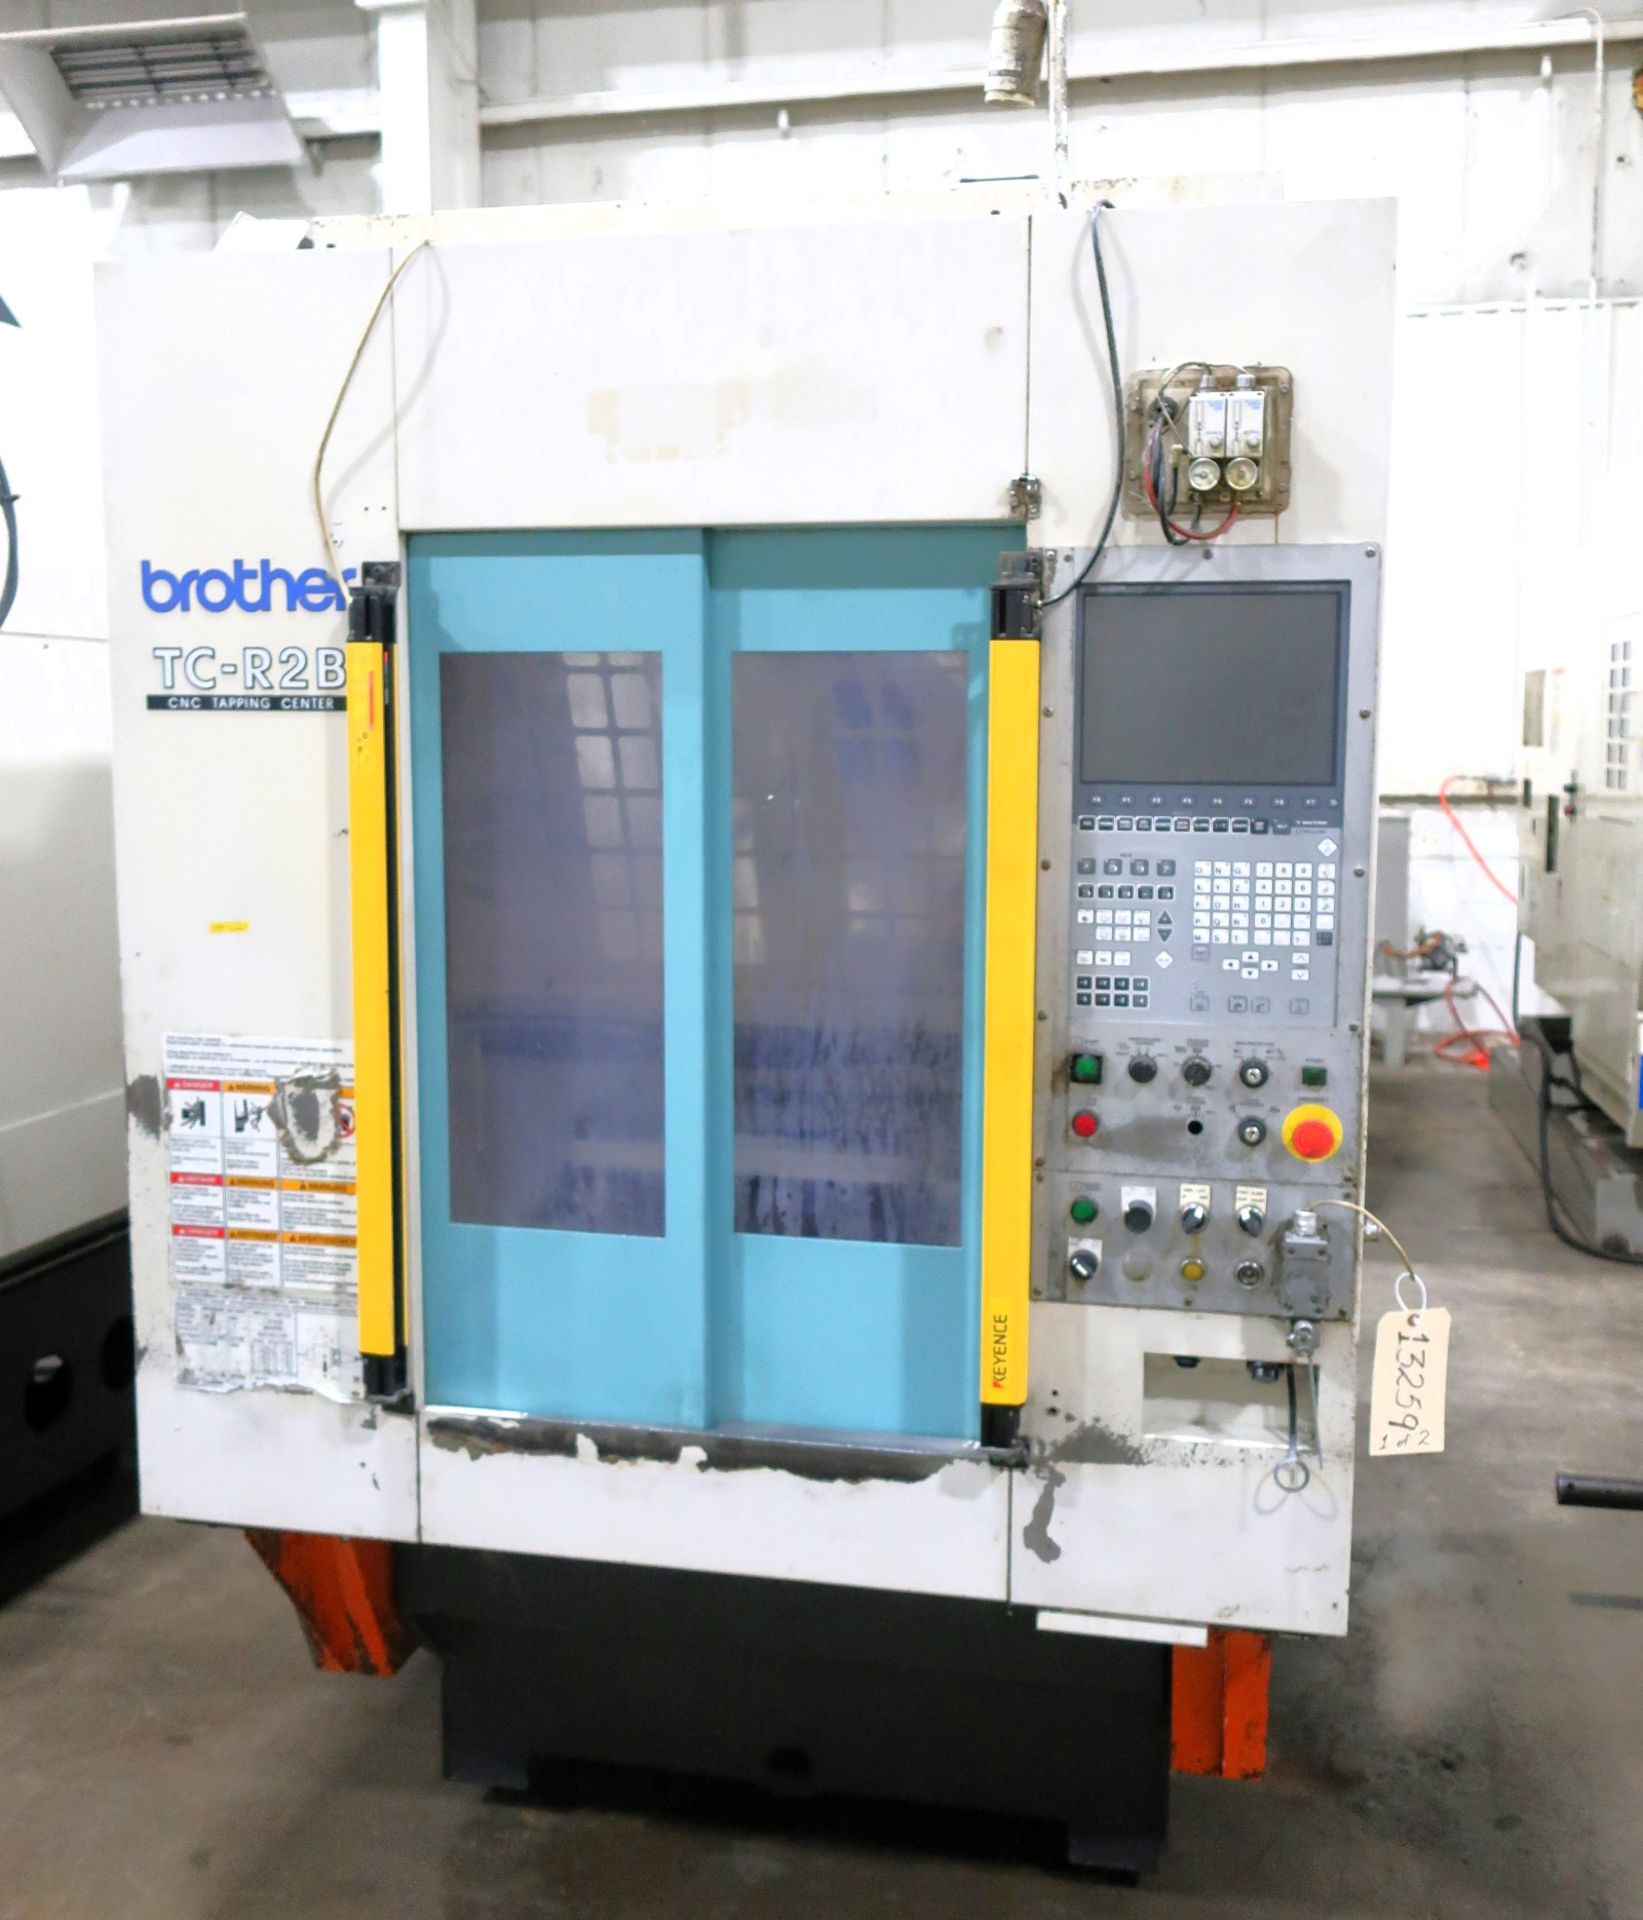 BROTHER TC-R2B CNC DRILL TAP VERTICAL MACHINING CENTER, S/N 111952, NEW 2012